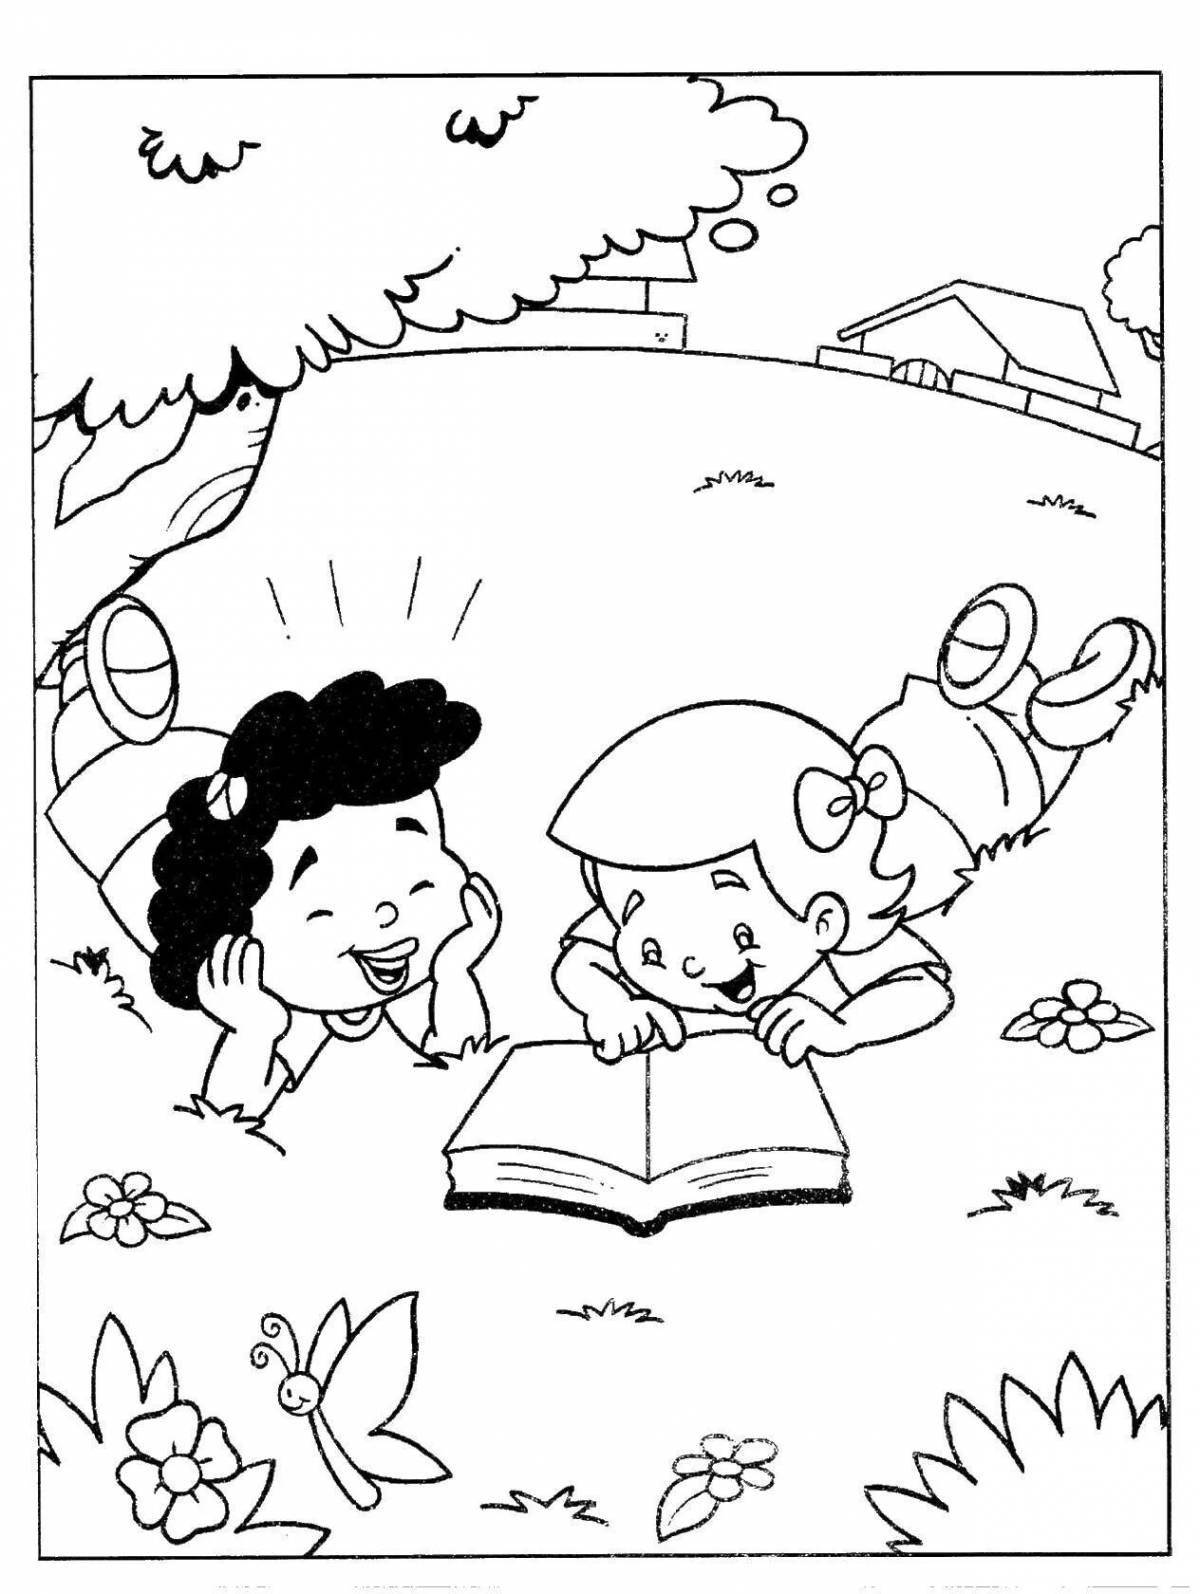 Color-filled children reading coloring pages